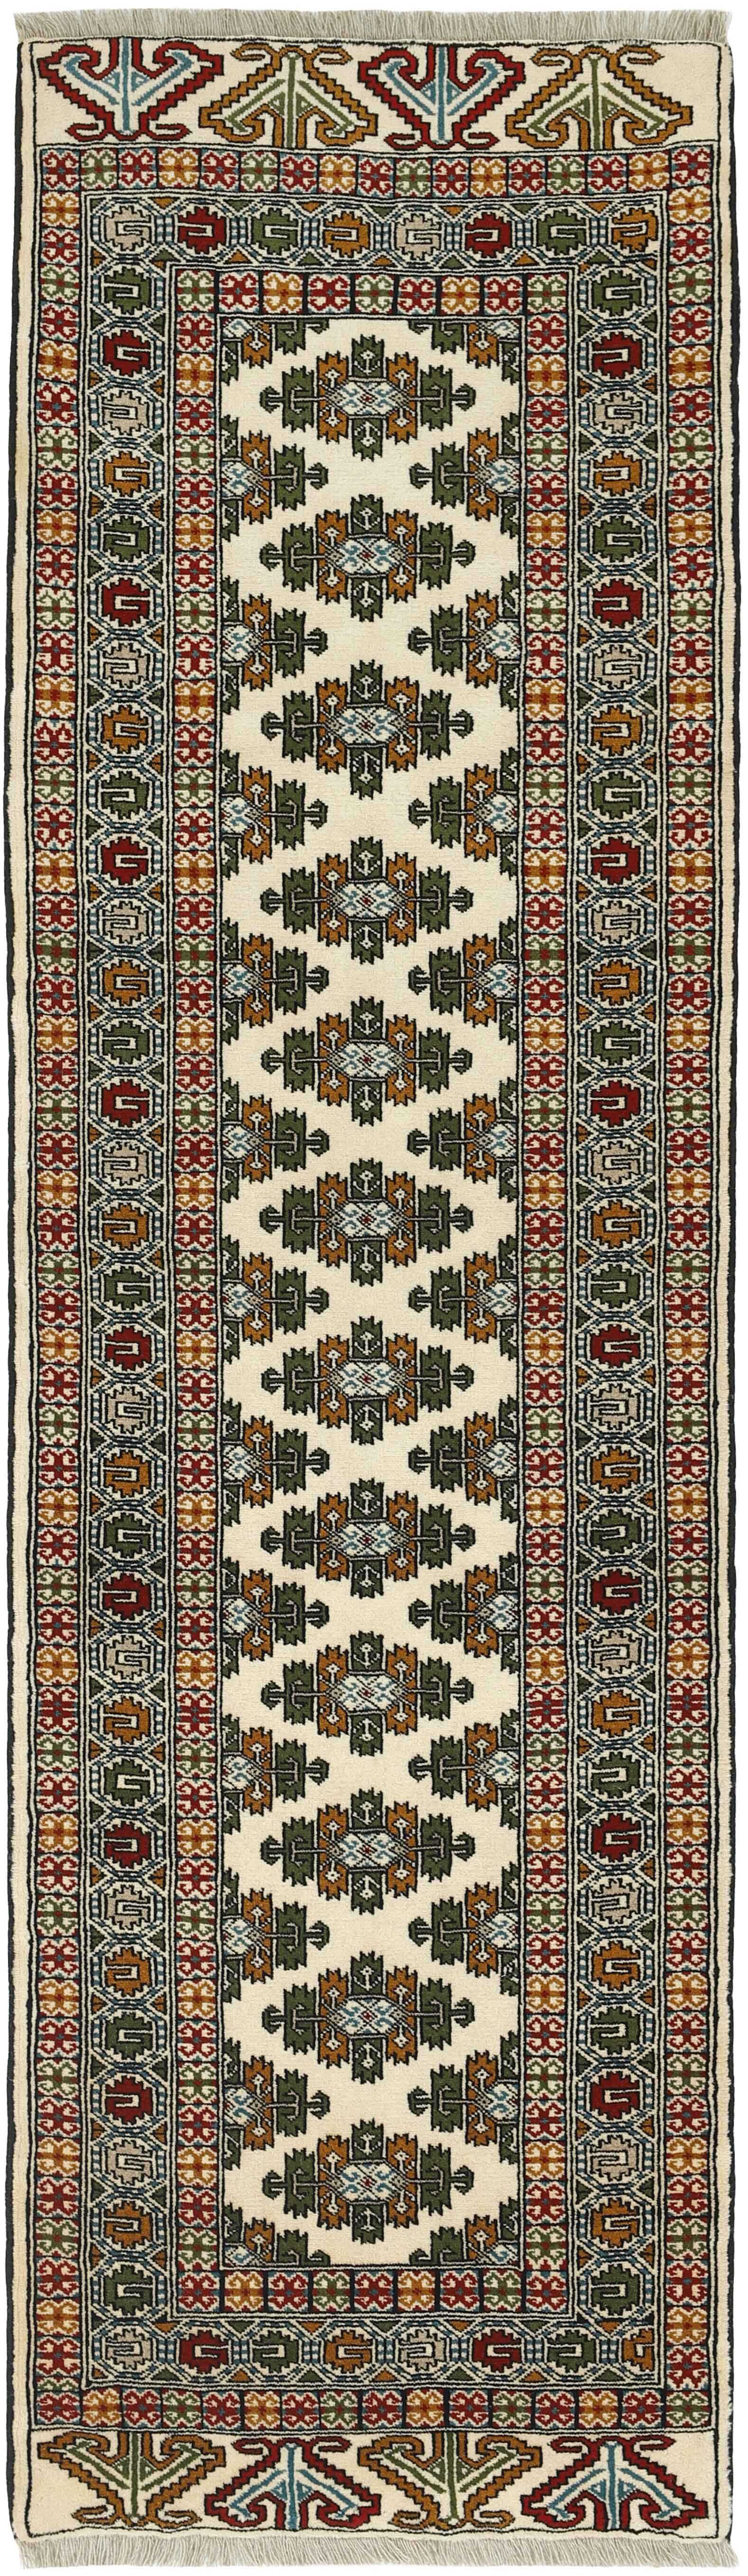 authentic blue, red and black persian runner